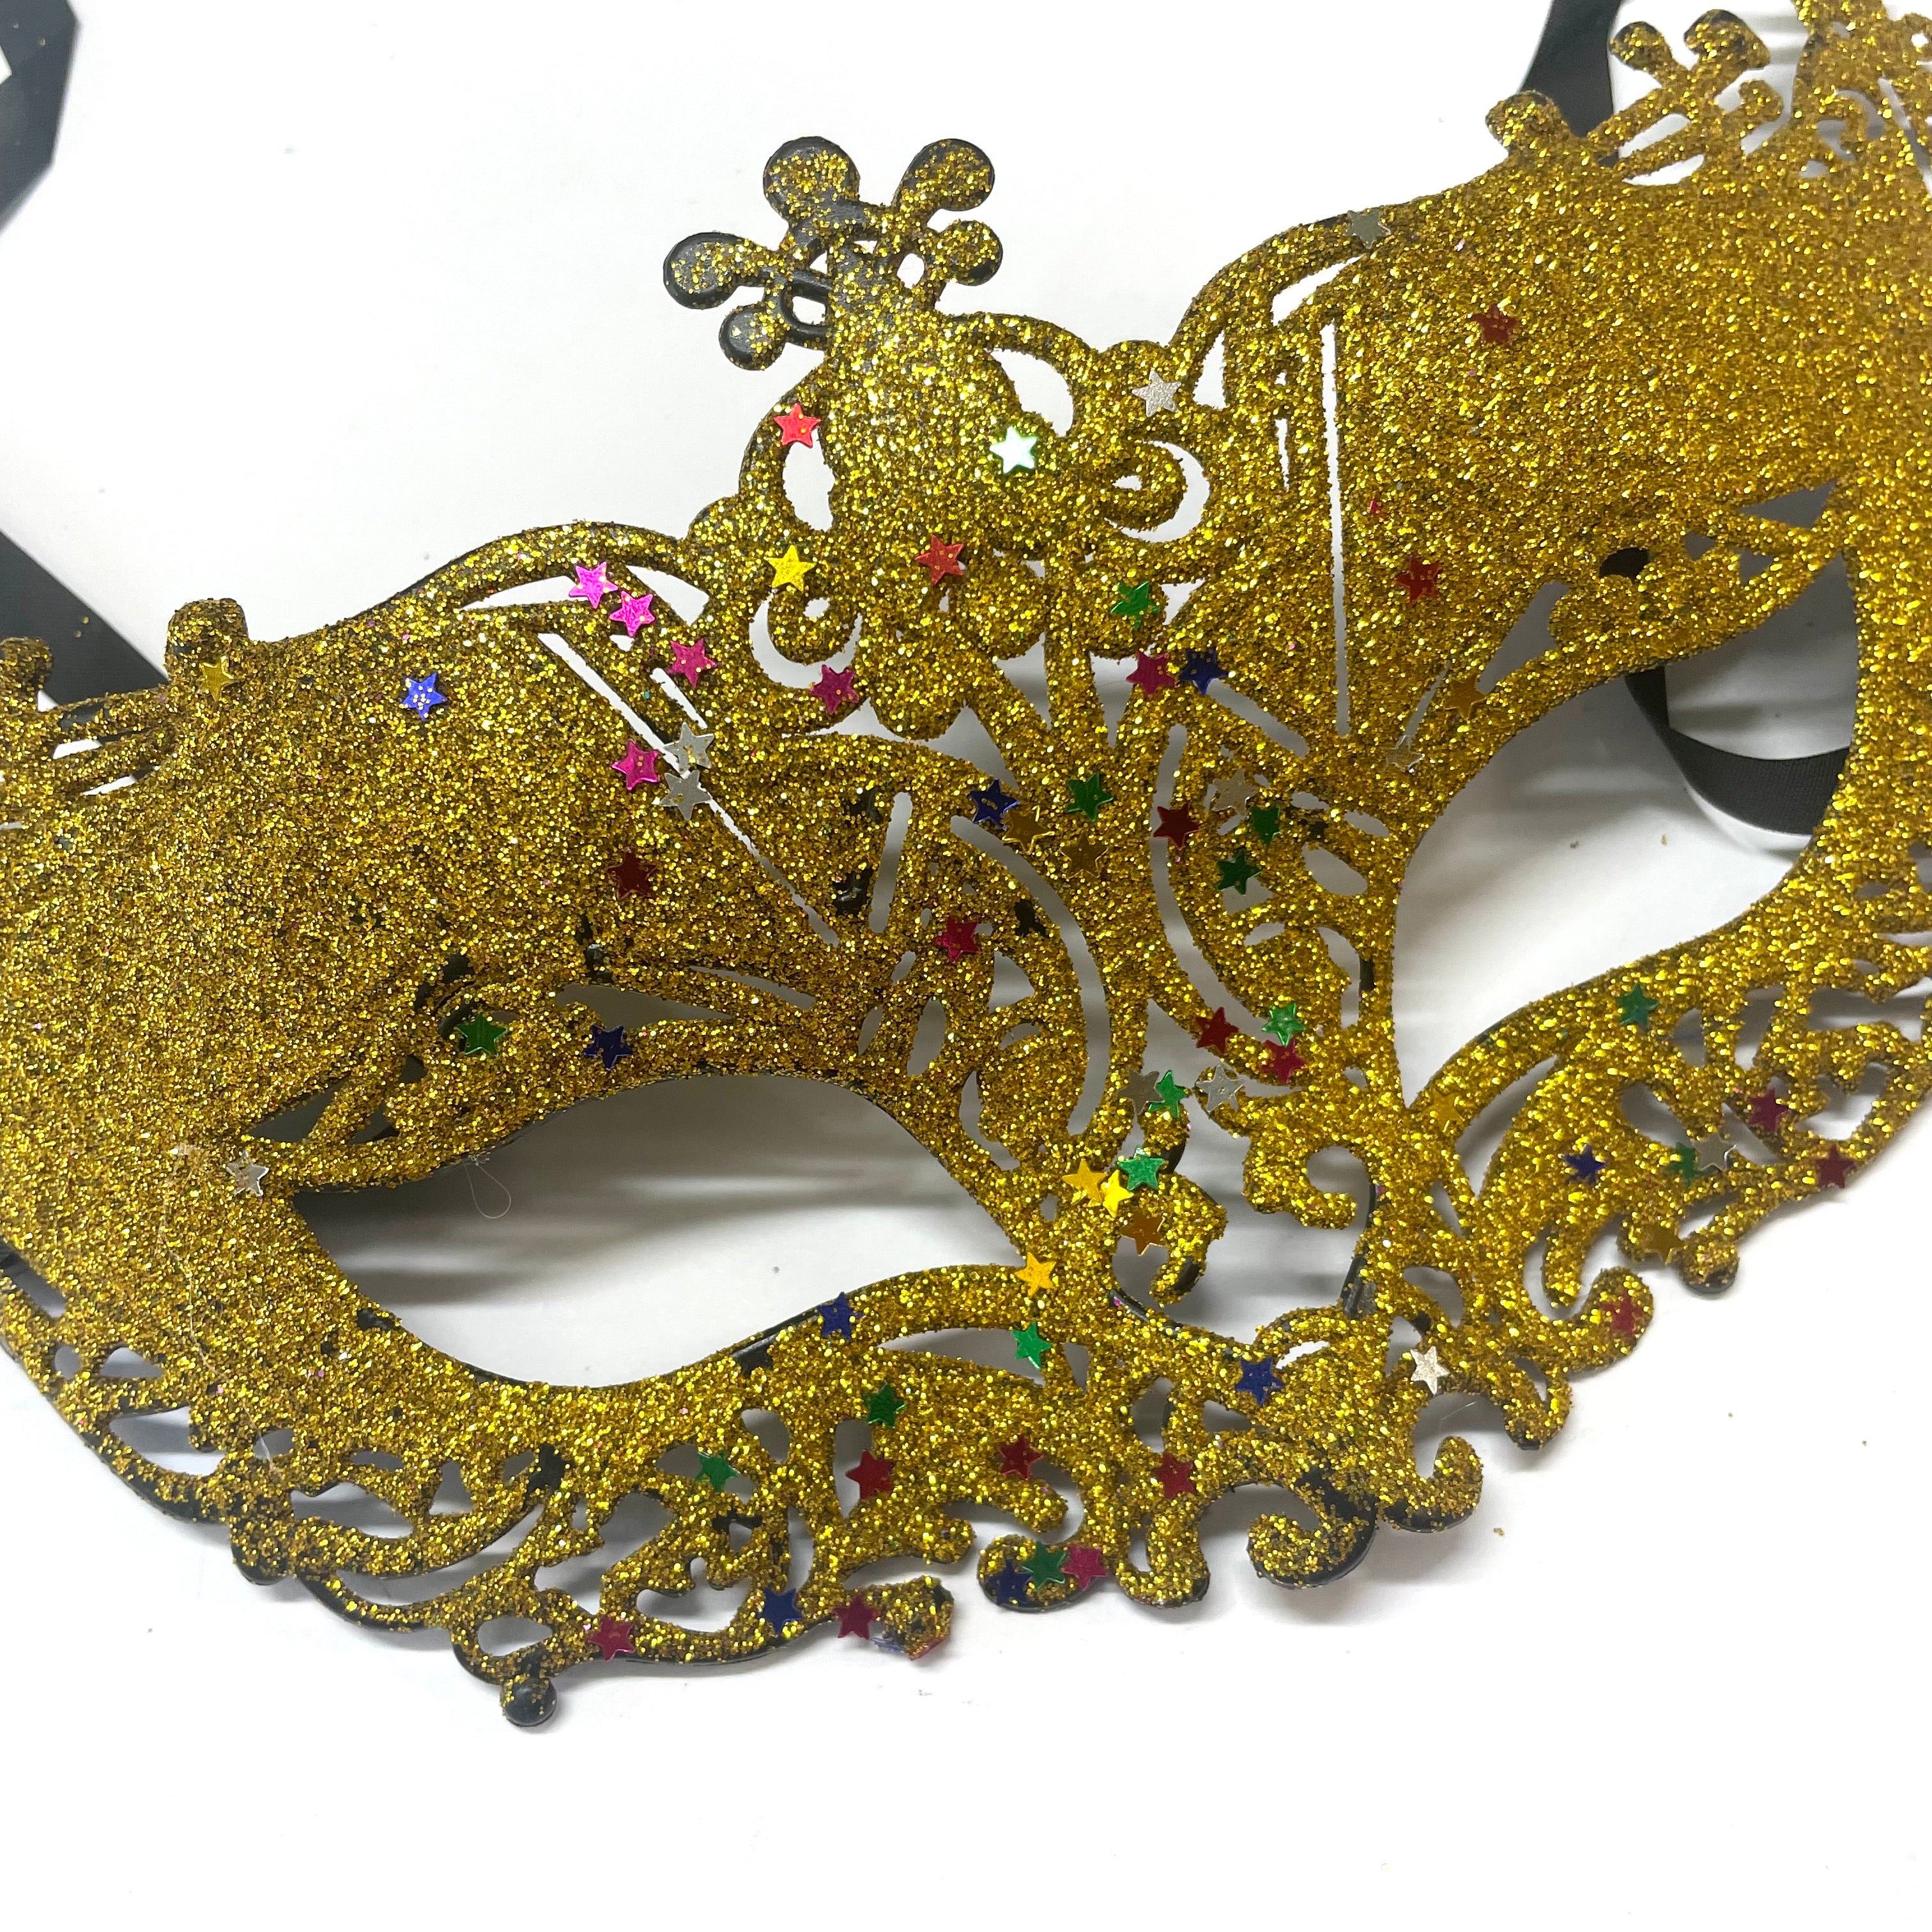 Women Lace Sexy Elegant Masquerade Ball Party Mask - Gold ((Style 5))